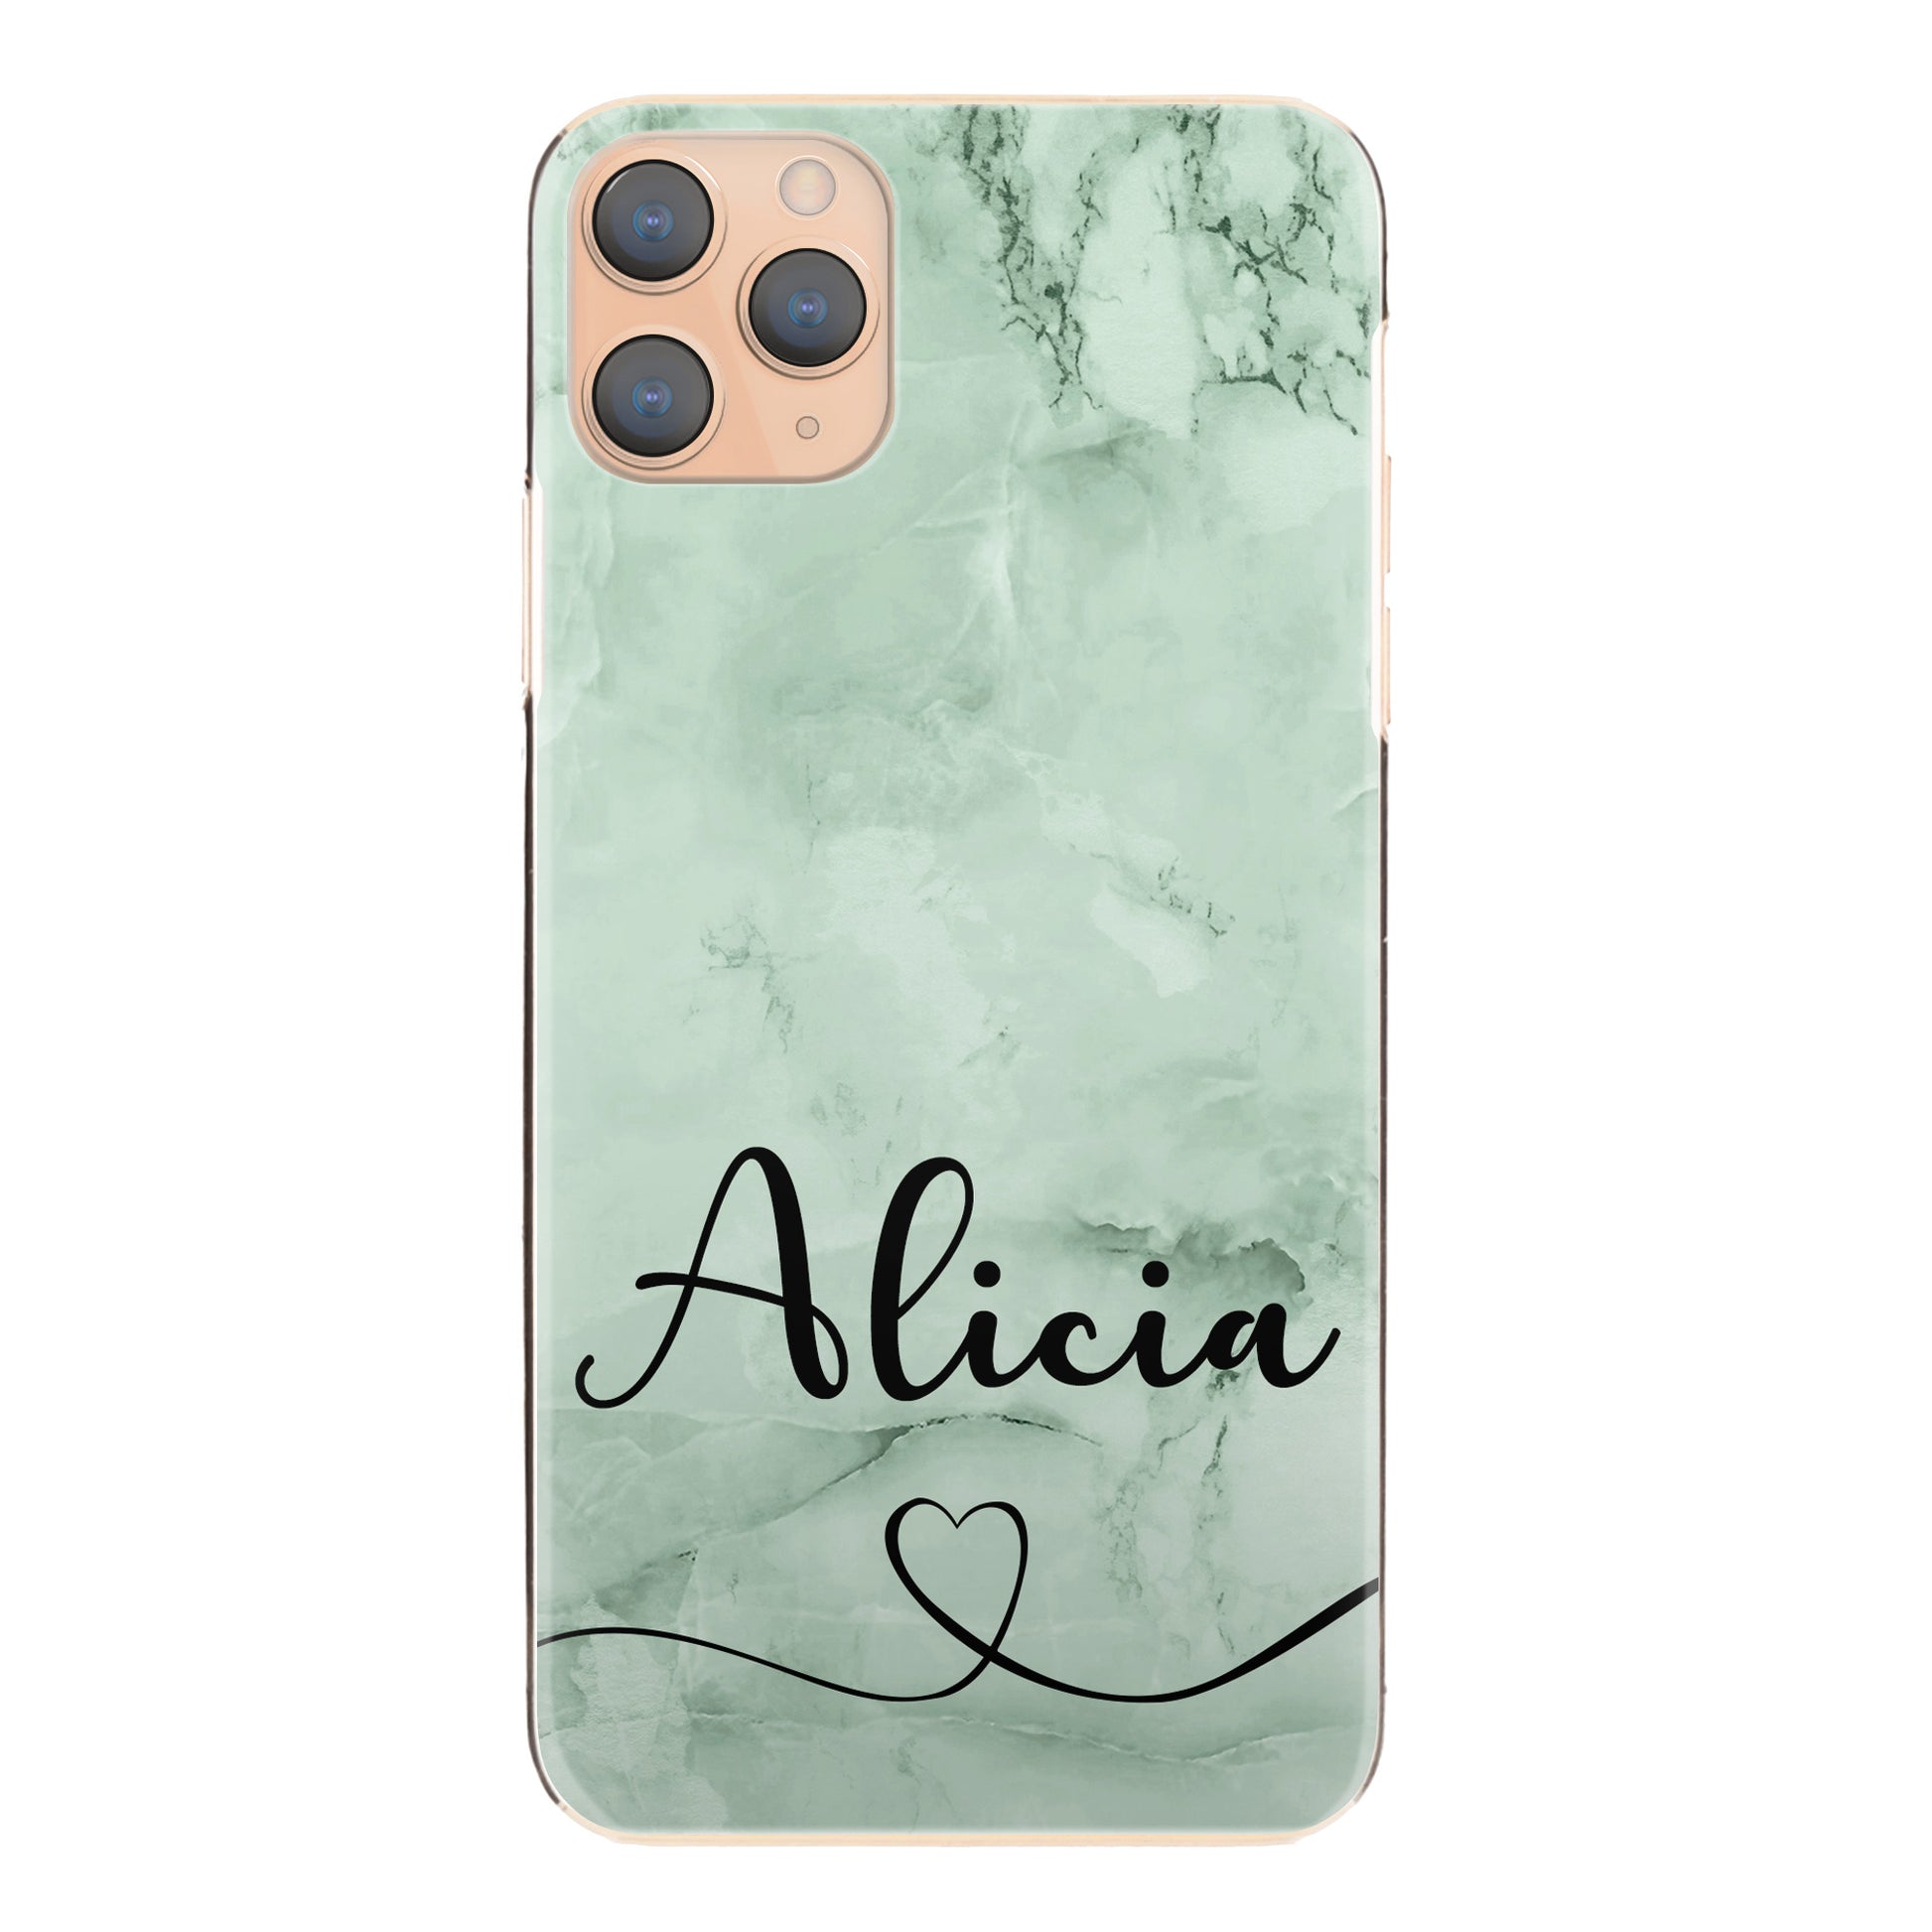 Personalised Nokia Phone Hard Case with Heart Accented Stylish Text on Mint Green Marble